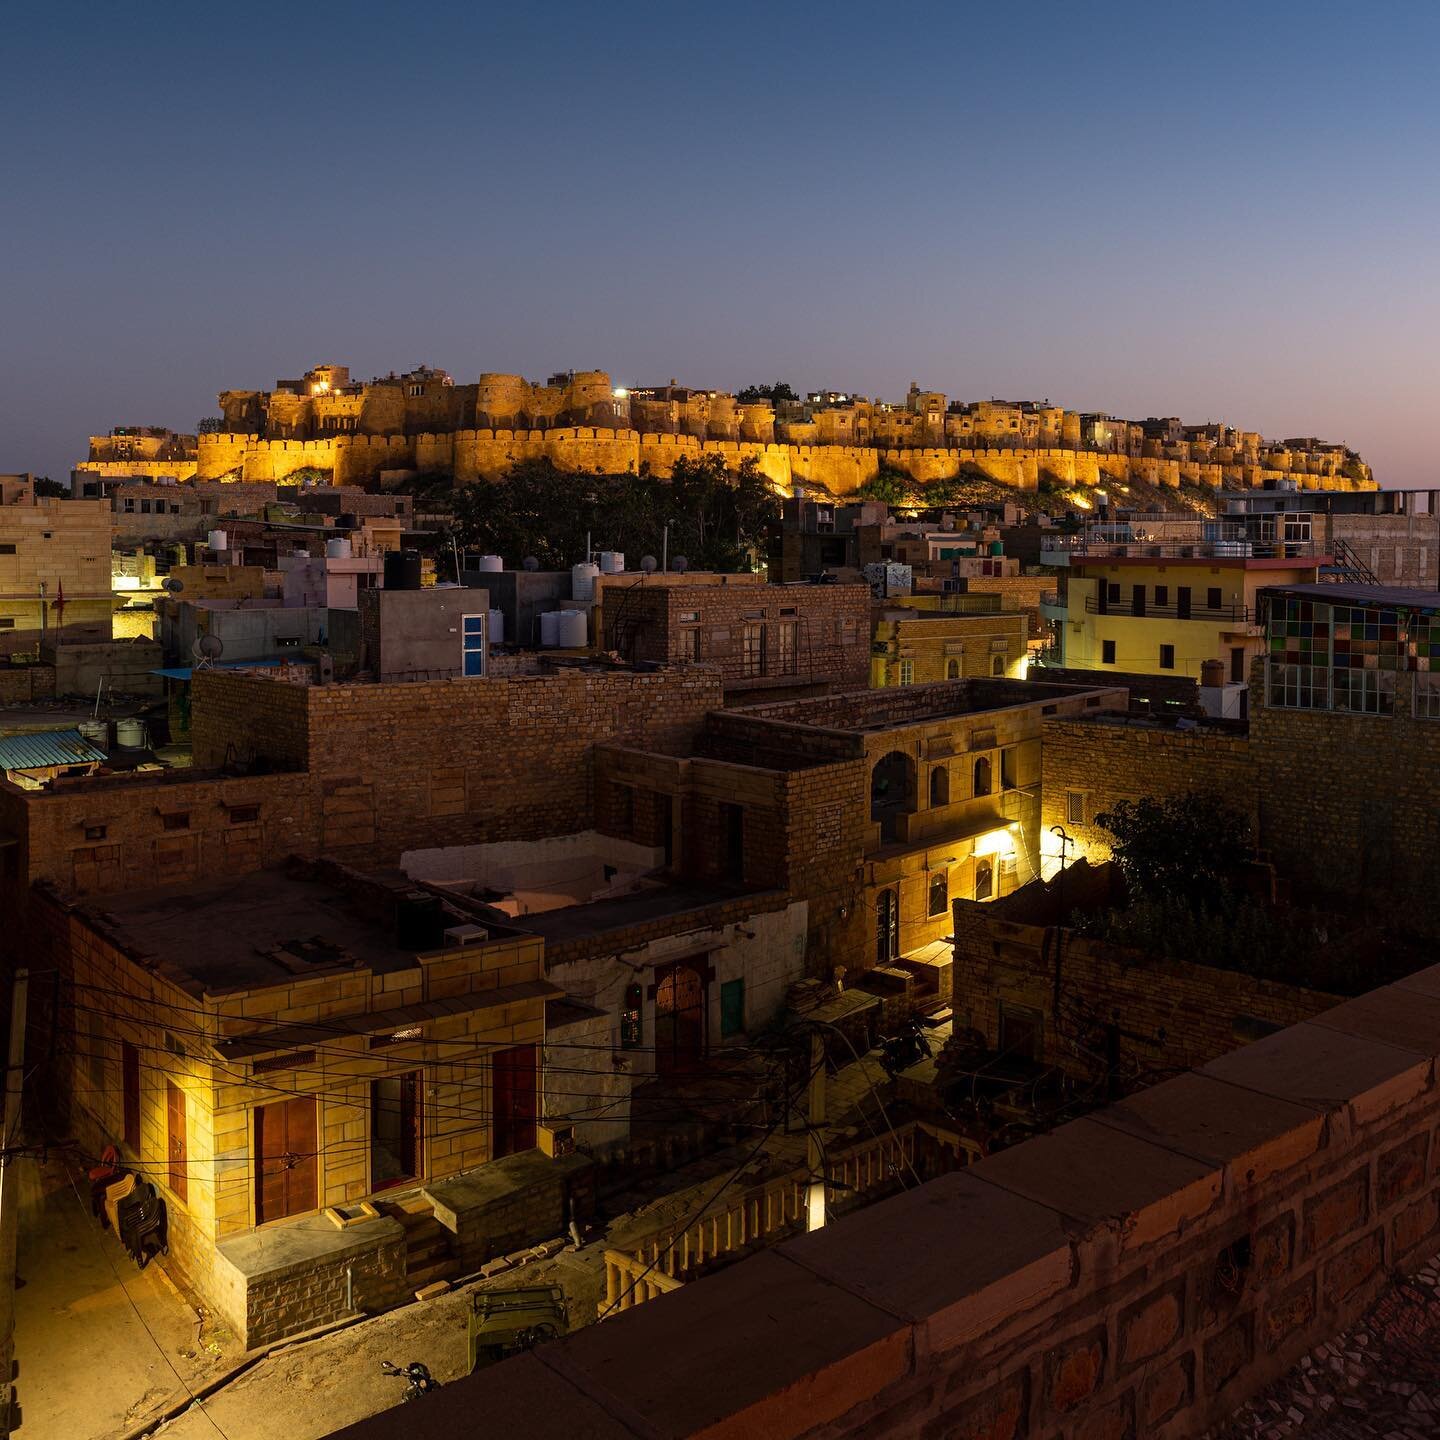 Jaisalmer and its Fort